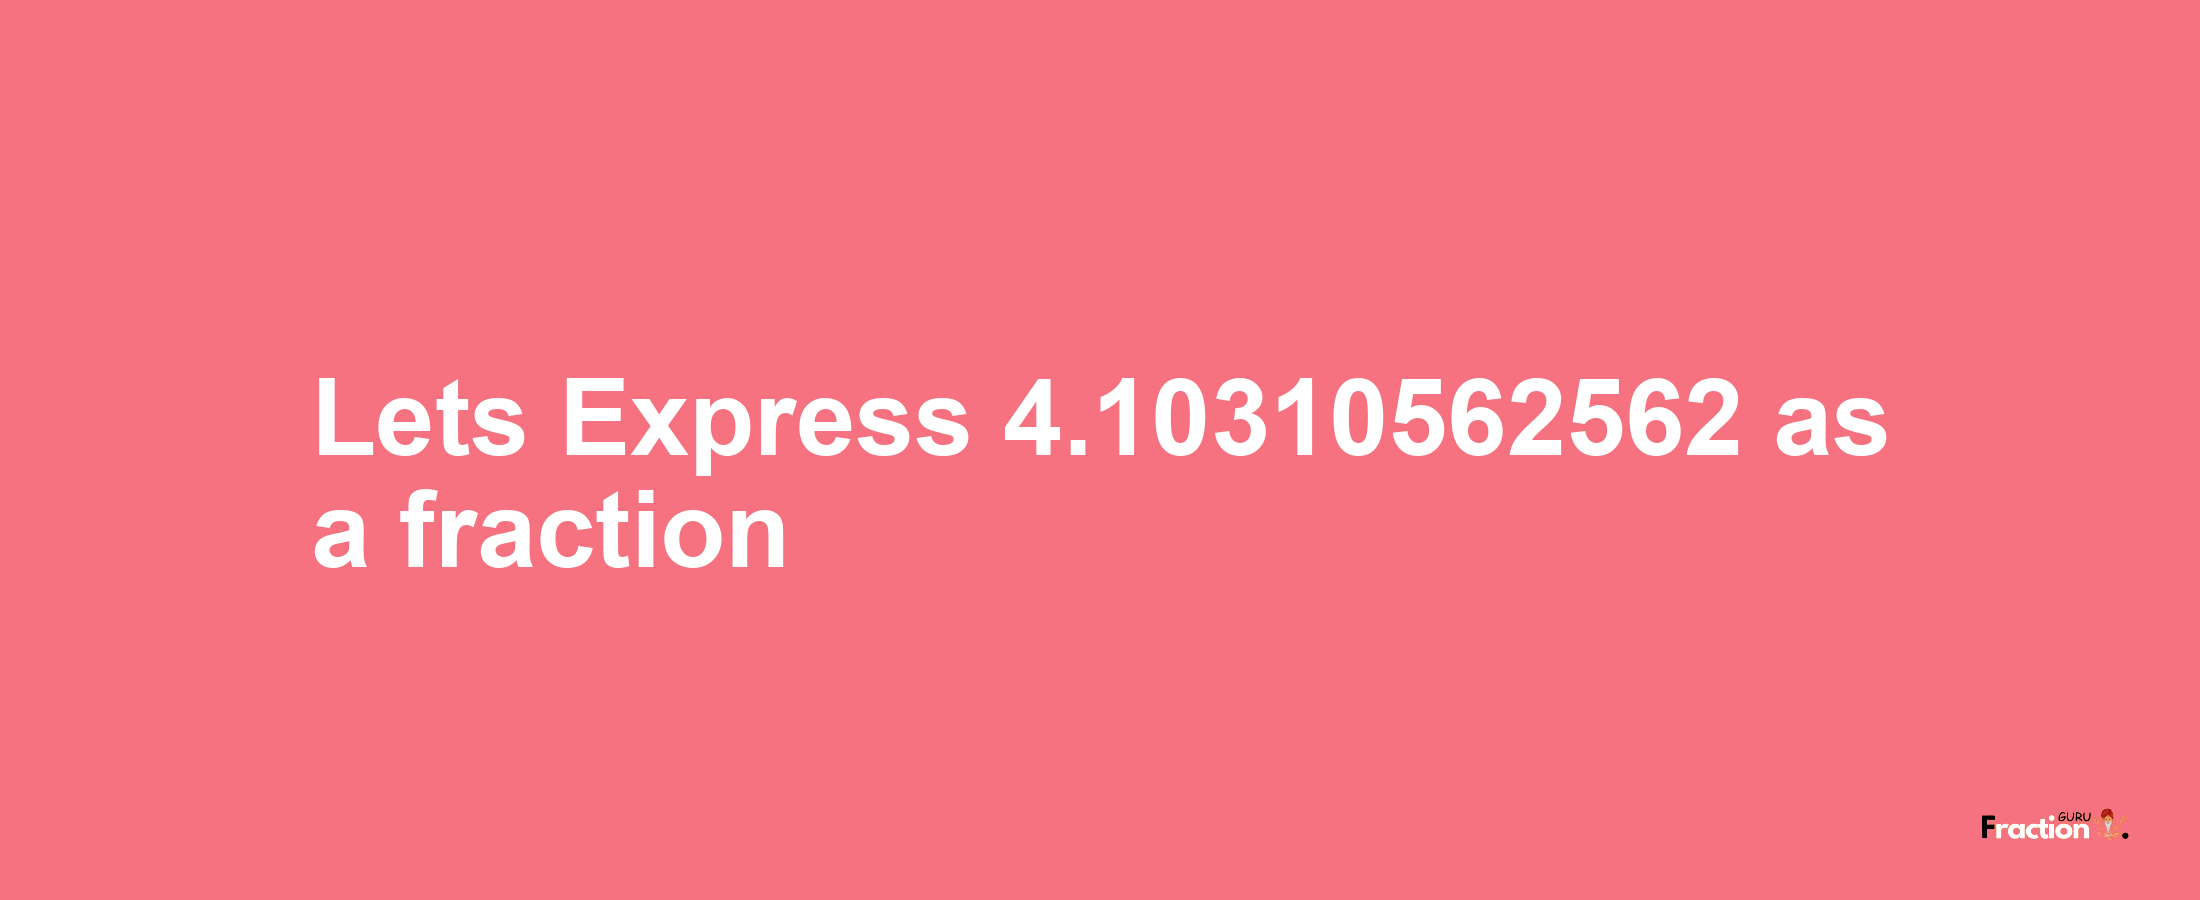 Lets Express 4.10310562562 as afraction